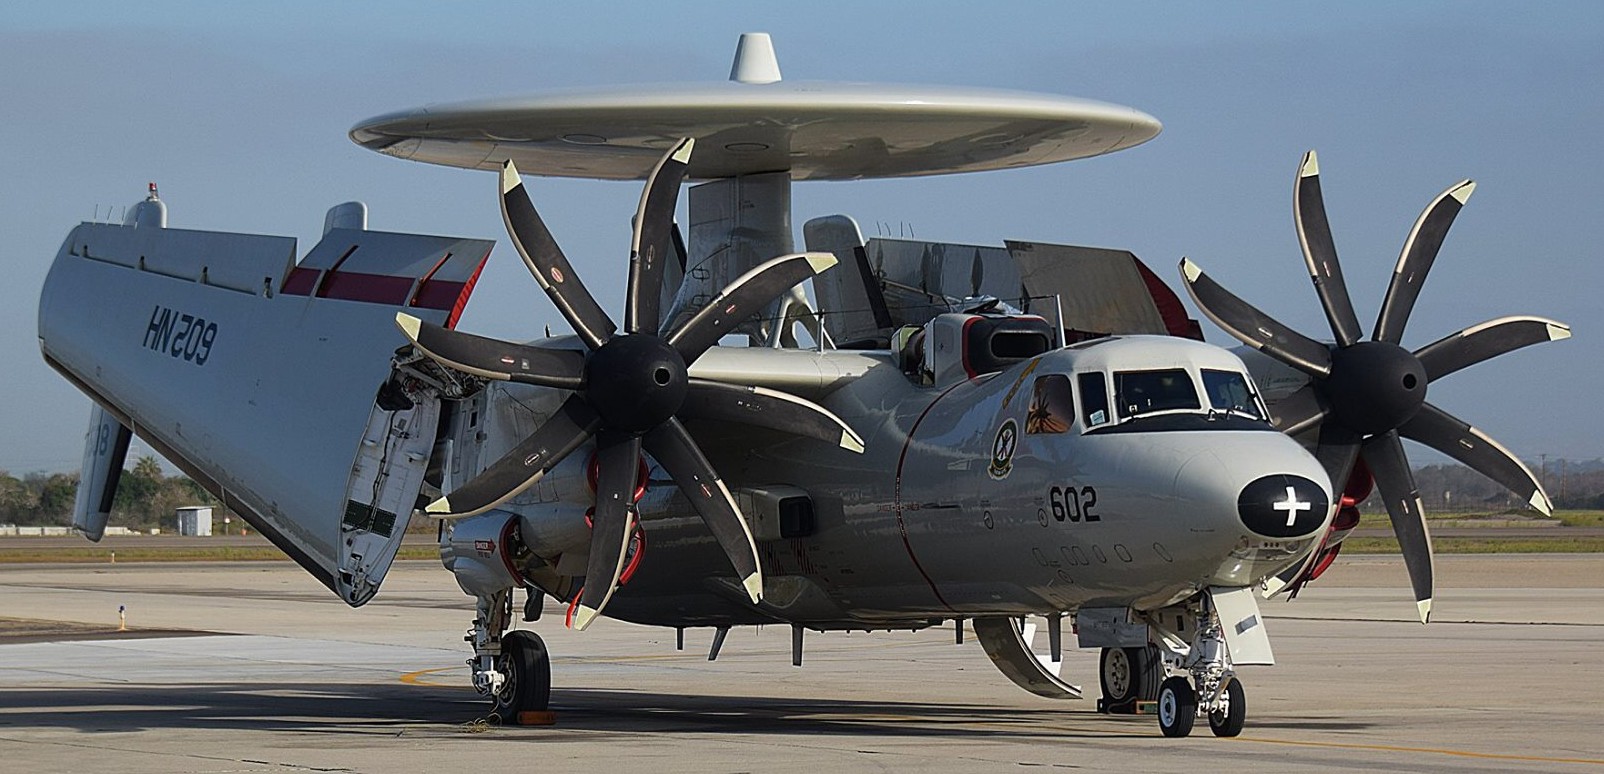 vaw-115 liberty bells carrier airborne early warning squadron us navy grumman e-2c hawkeye 2000 np 112